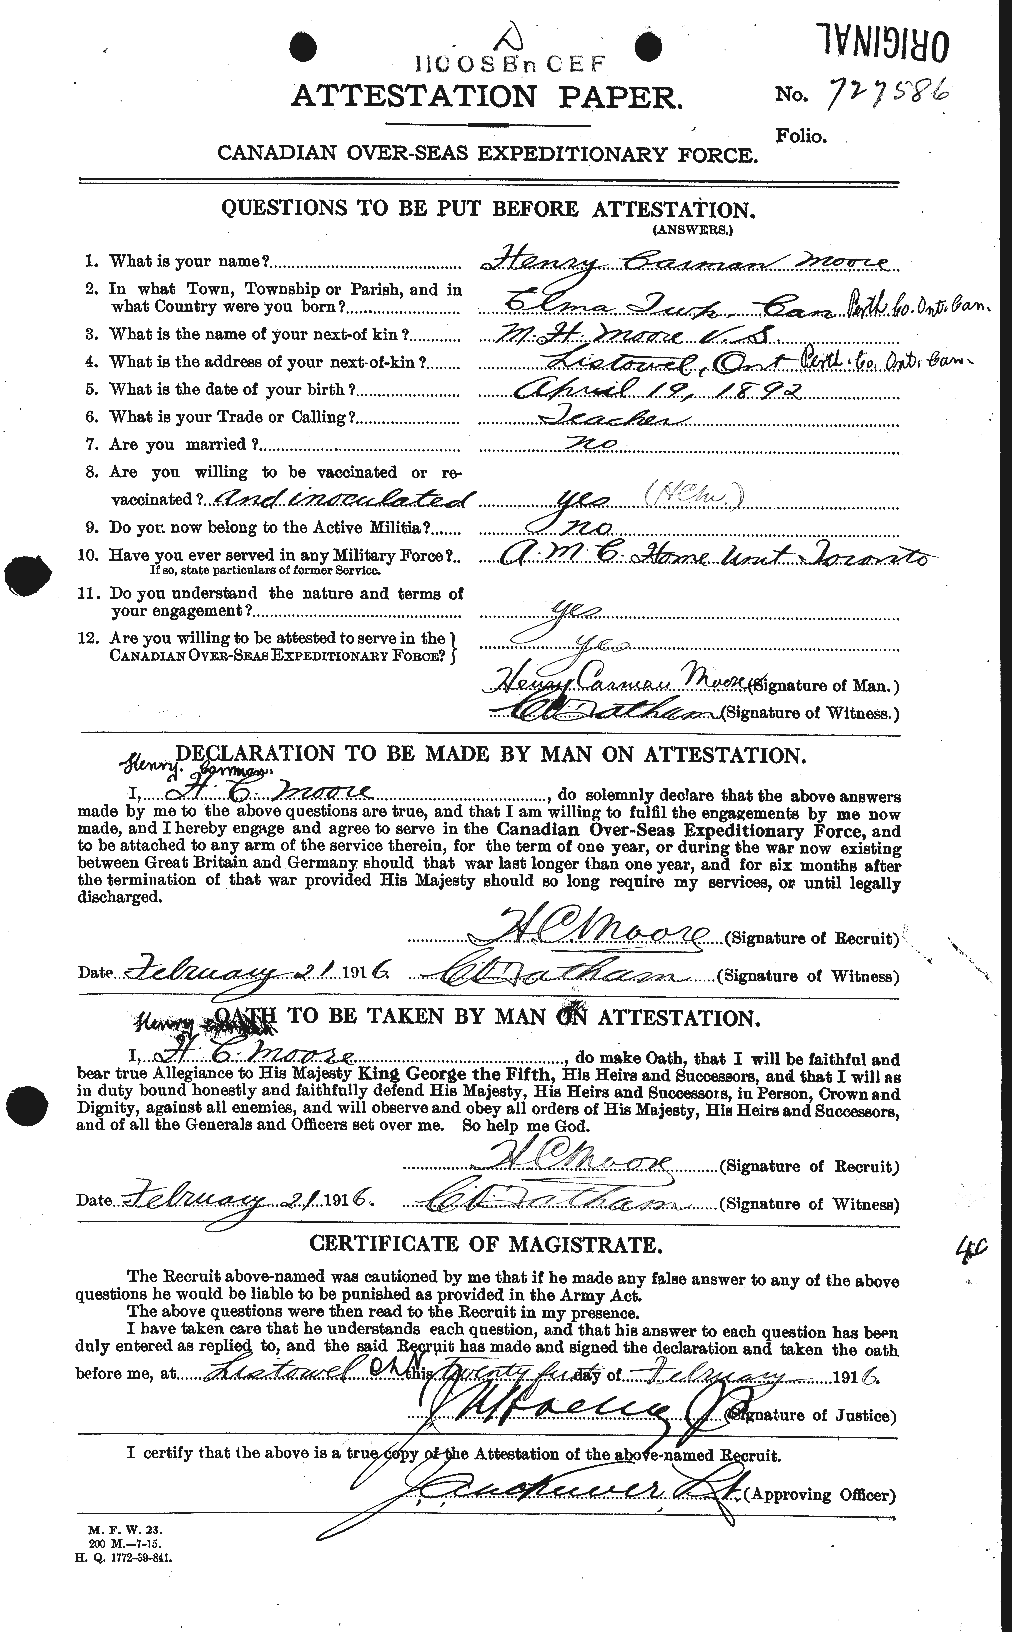 Personnel Records of the First World War - CEF 502101a